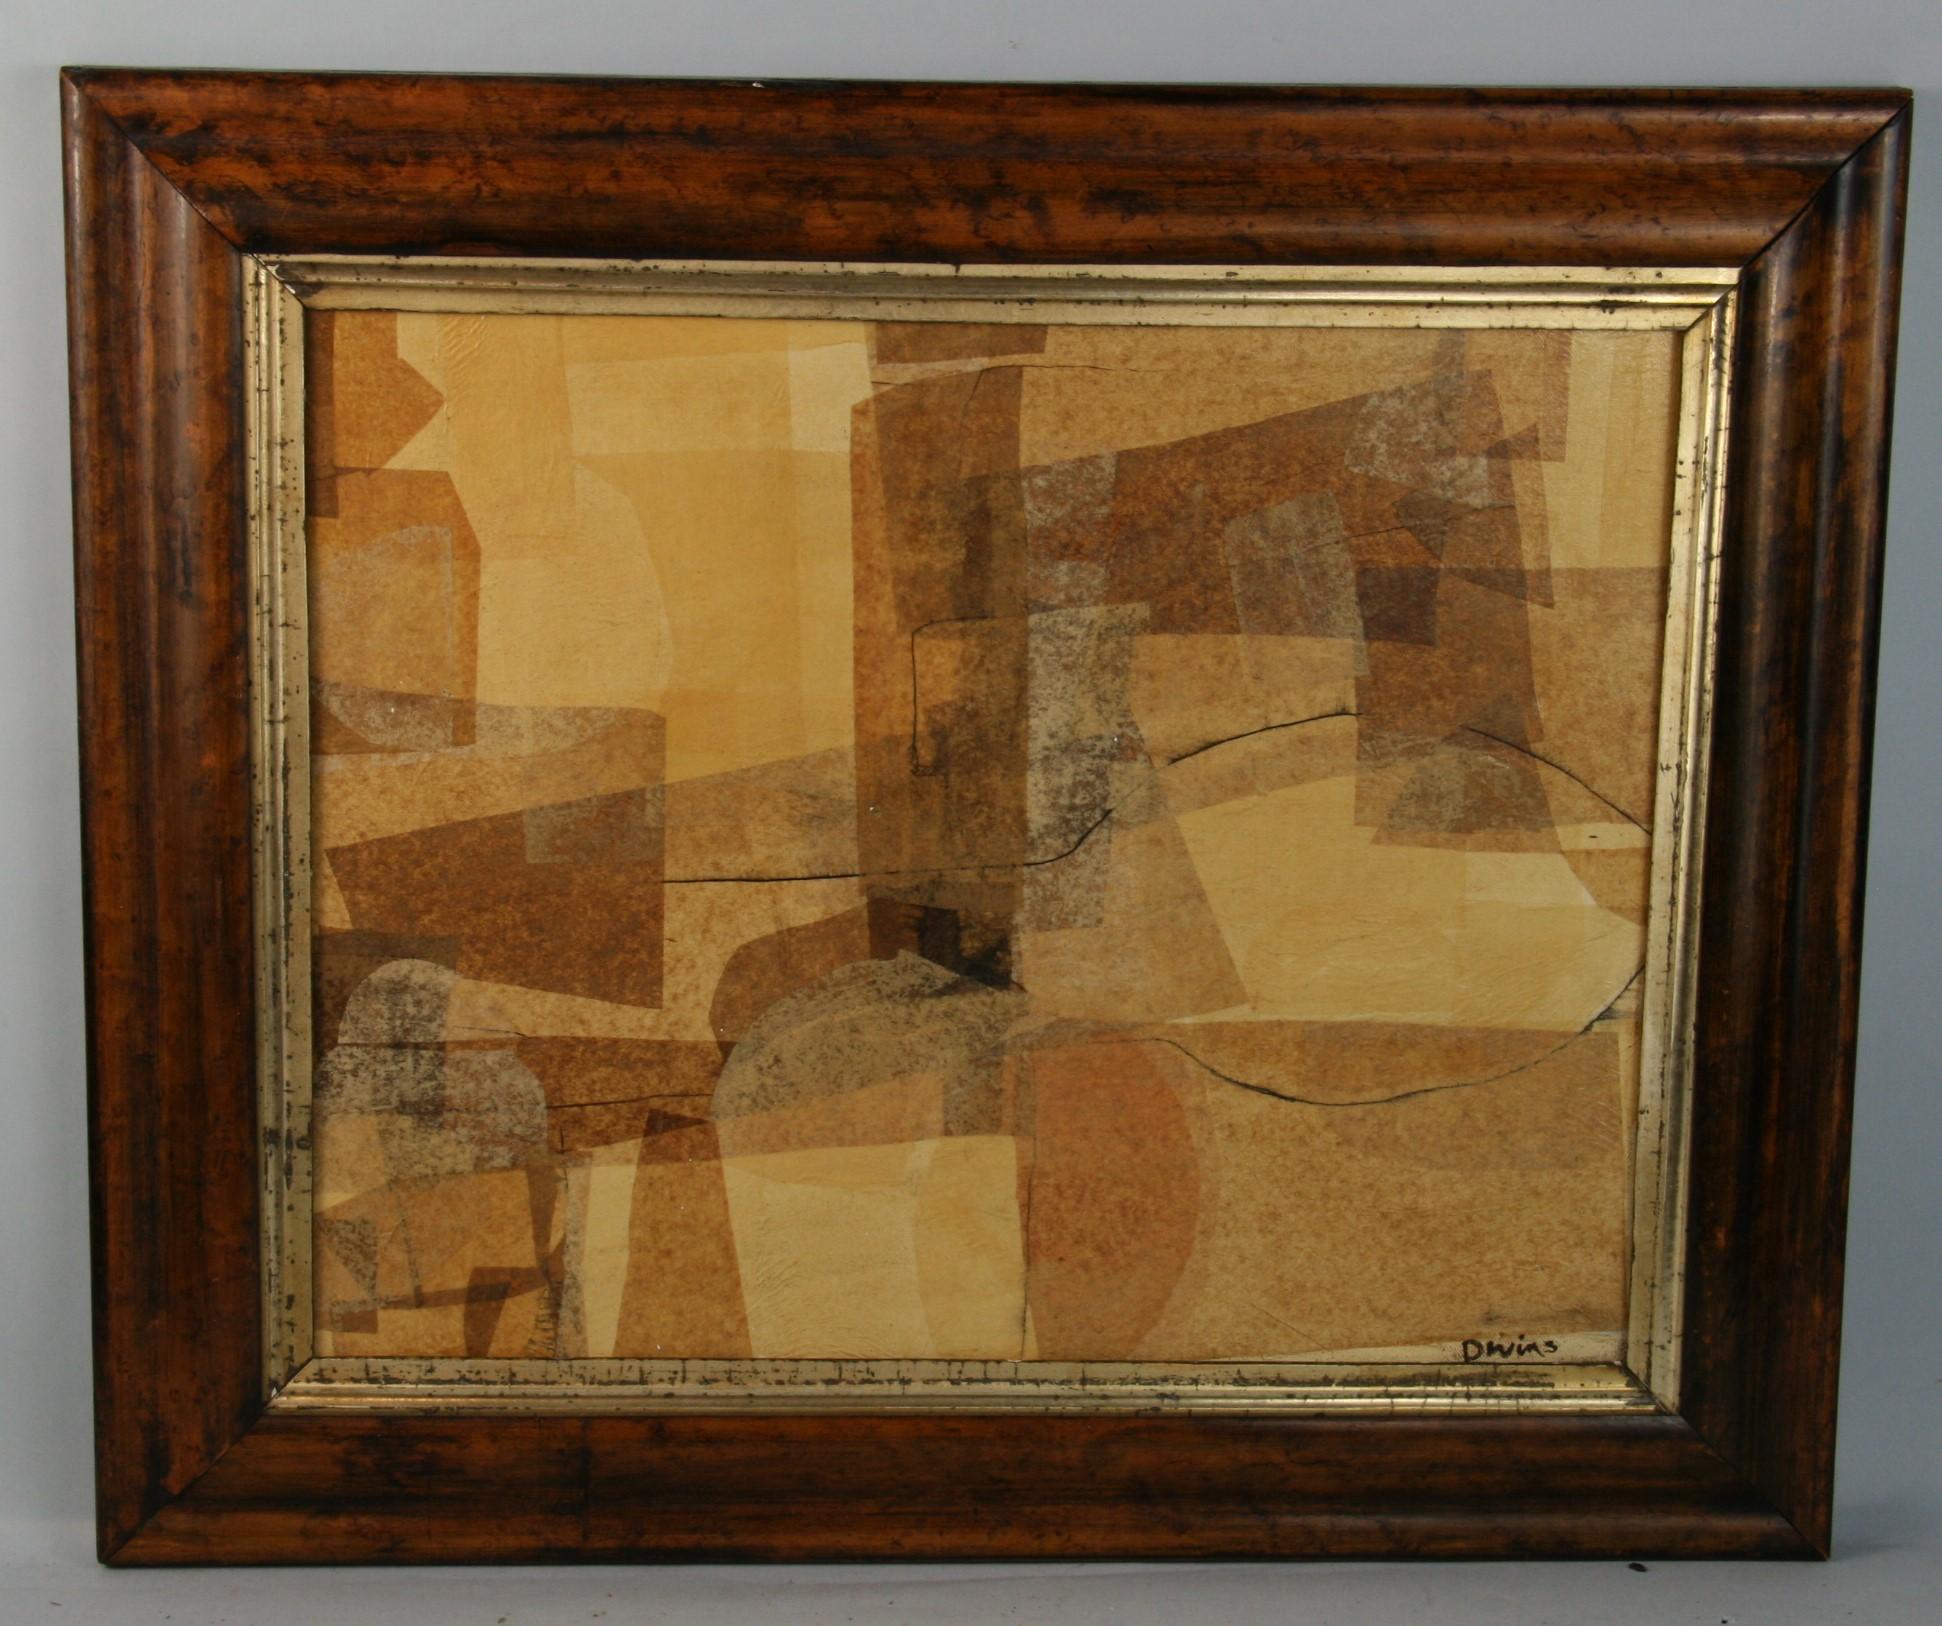  Cubic Geometric Monochromatic Mid Century  Oil Painting 1980 For Sale 2